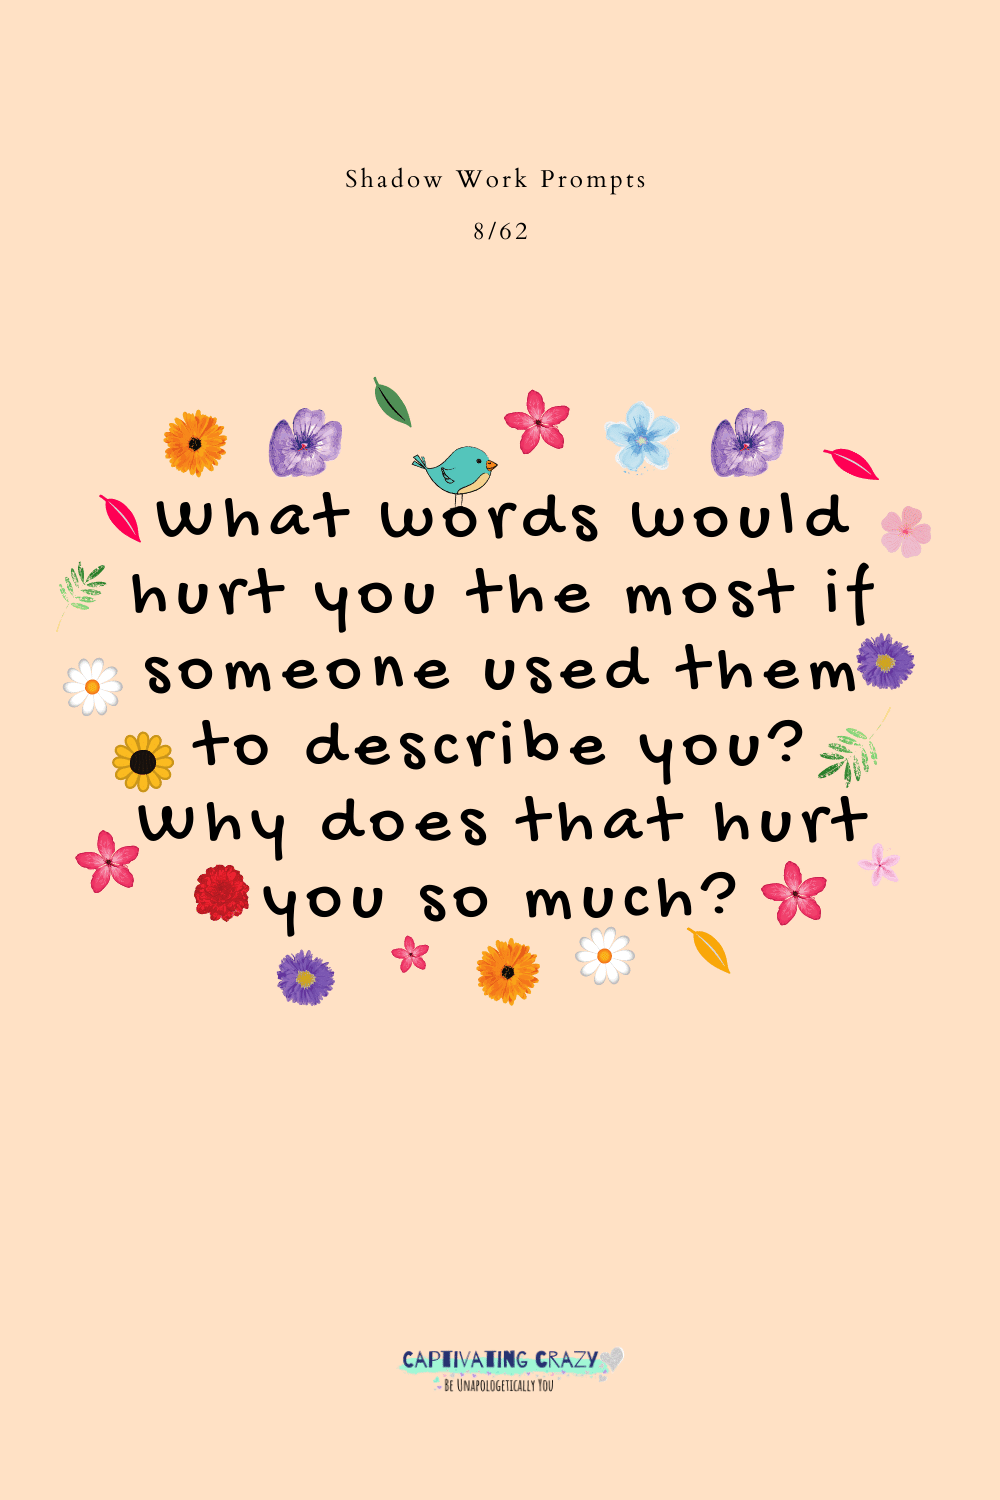 What words would hurt you the most if someone used them to describe you? Why does that hurt you so much?